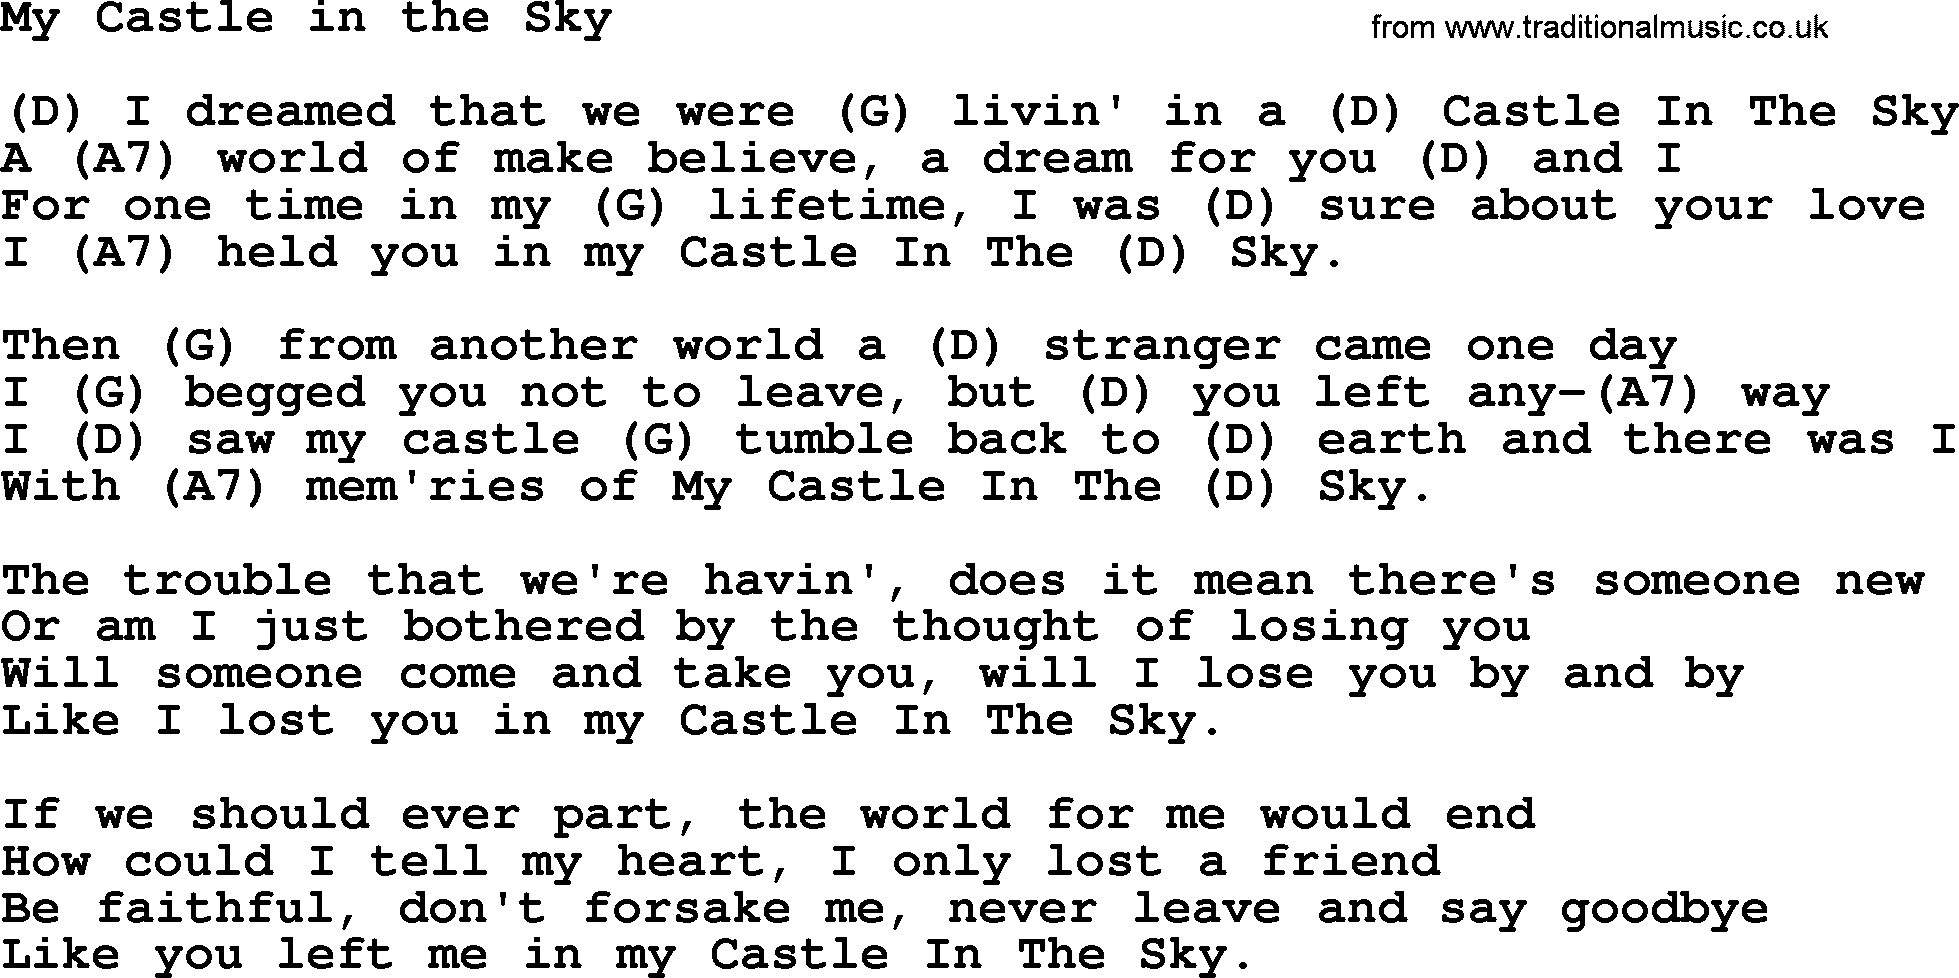 Marty Robbins song: My Castle in the Sky, lyrics and chords